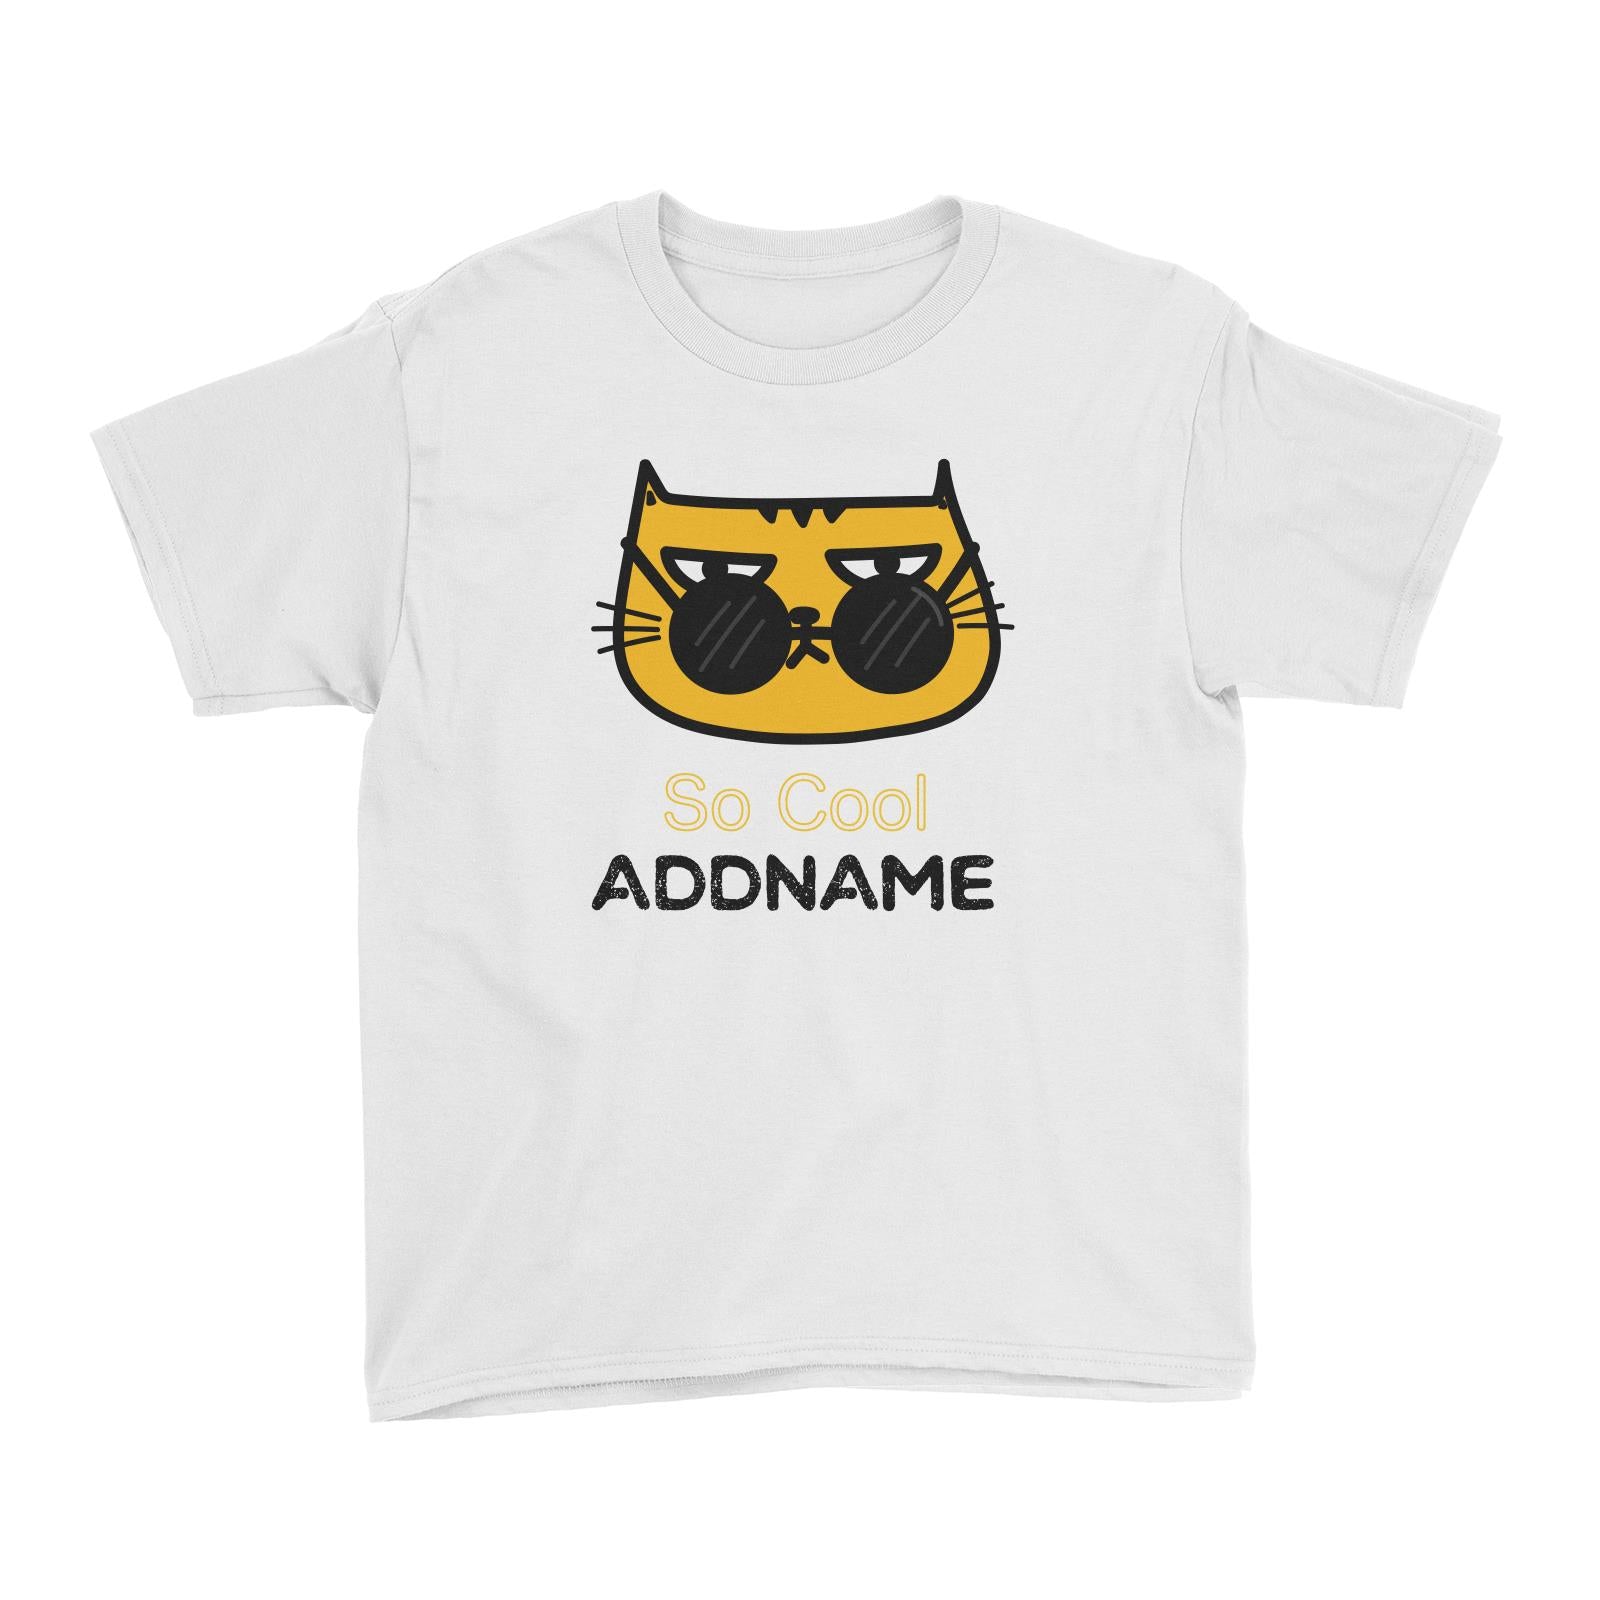 Cute Animals And Friends Series Cool Cat With Sunglasses Addname Kid's T-Shirt